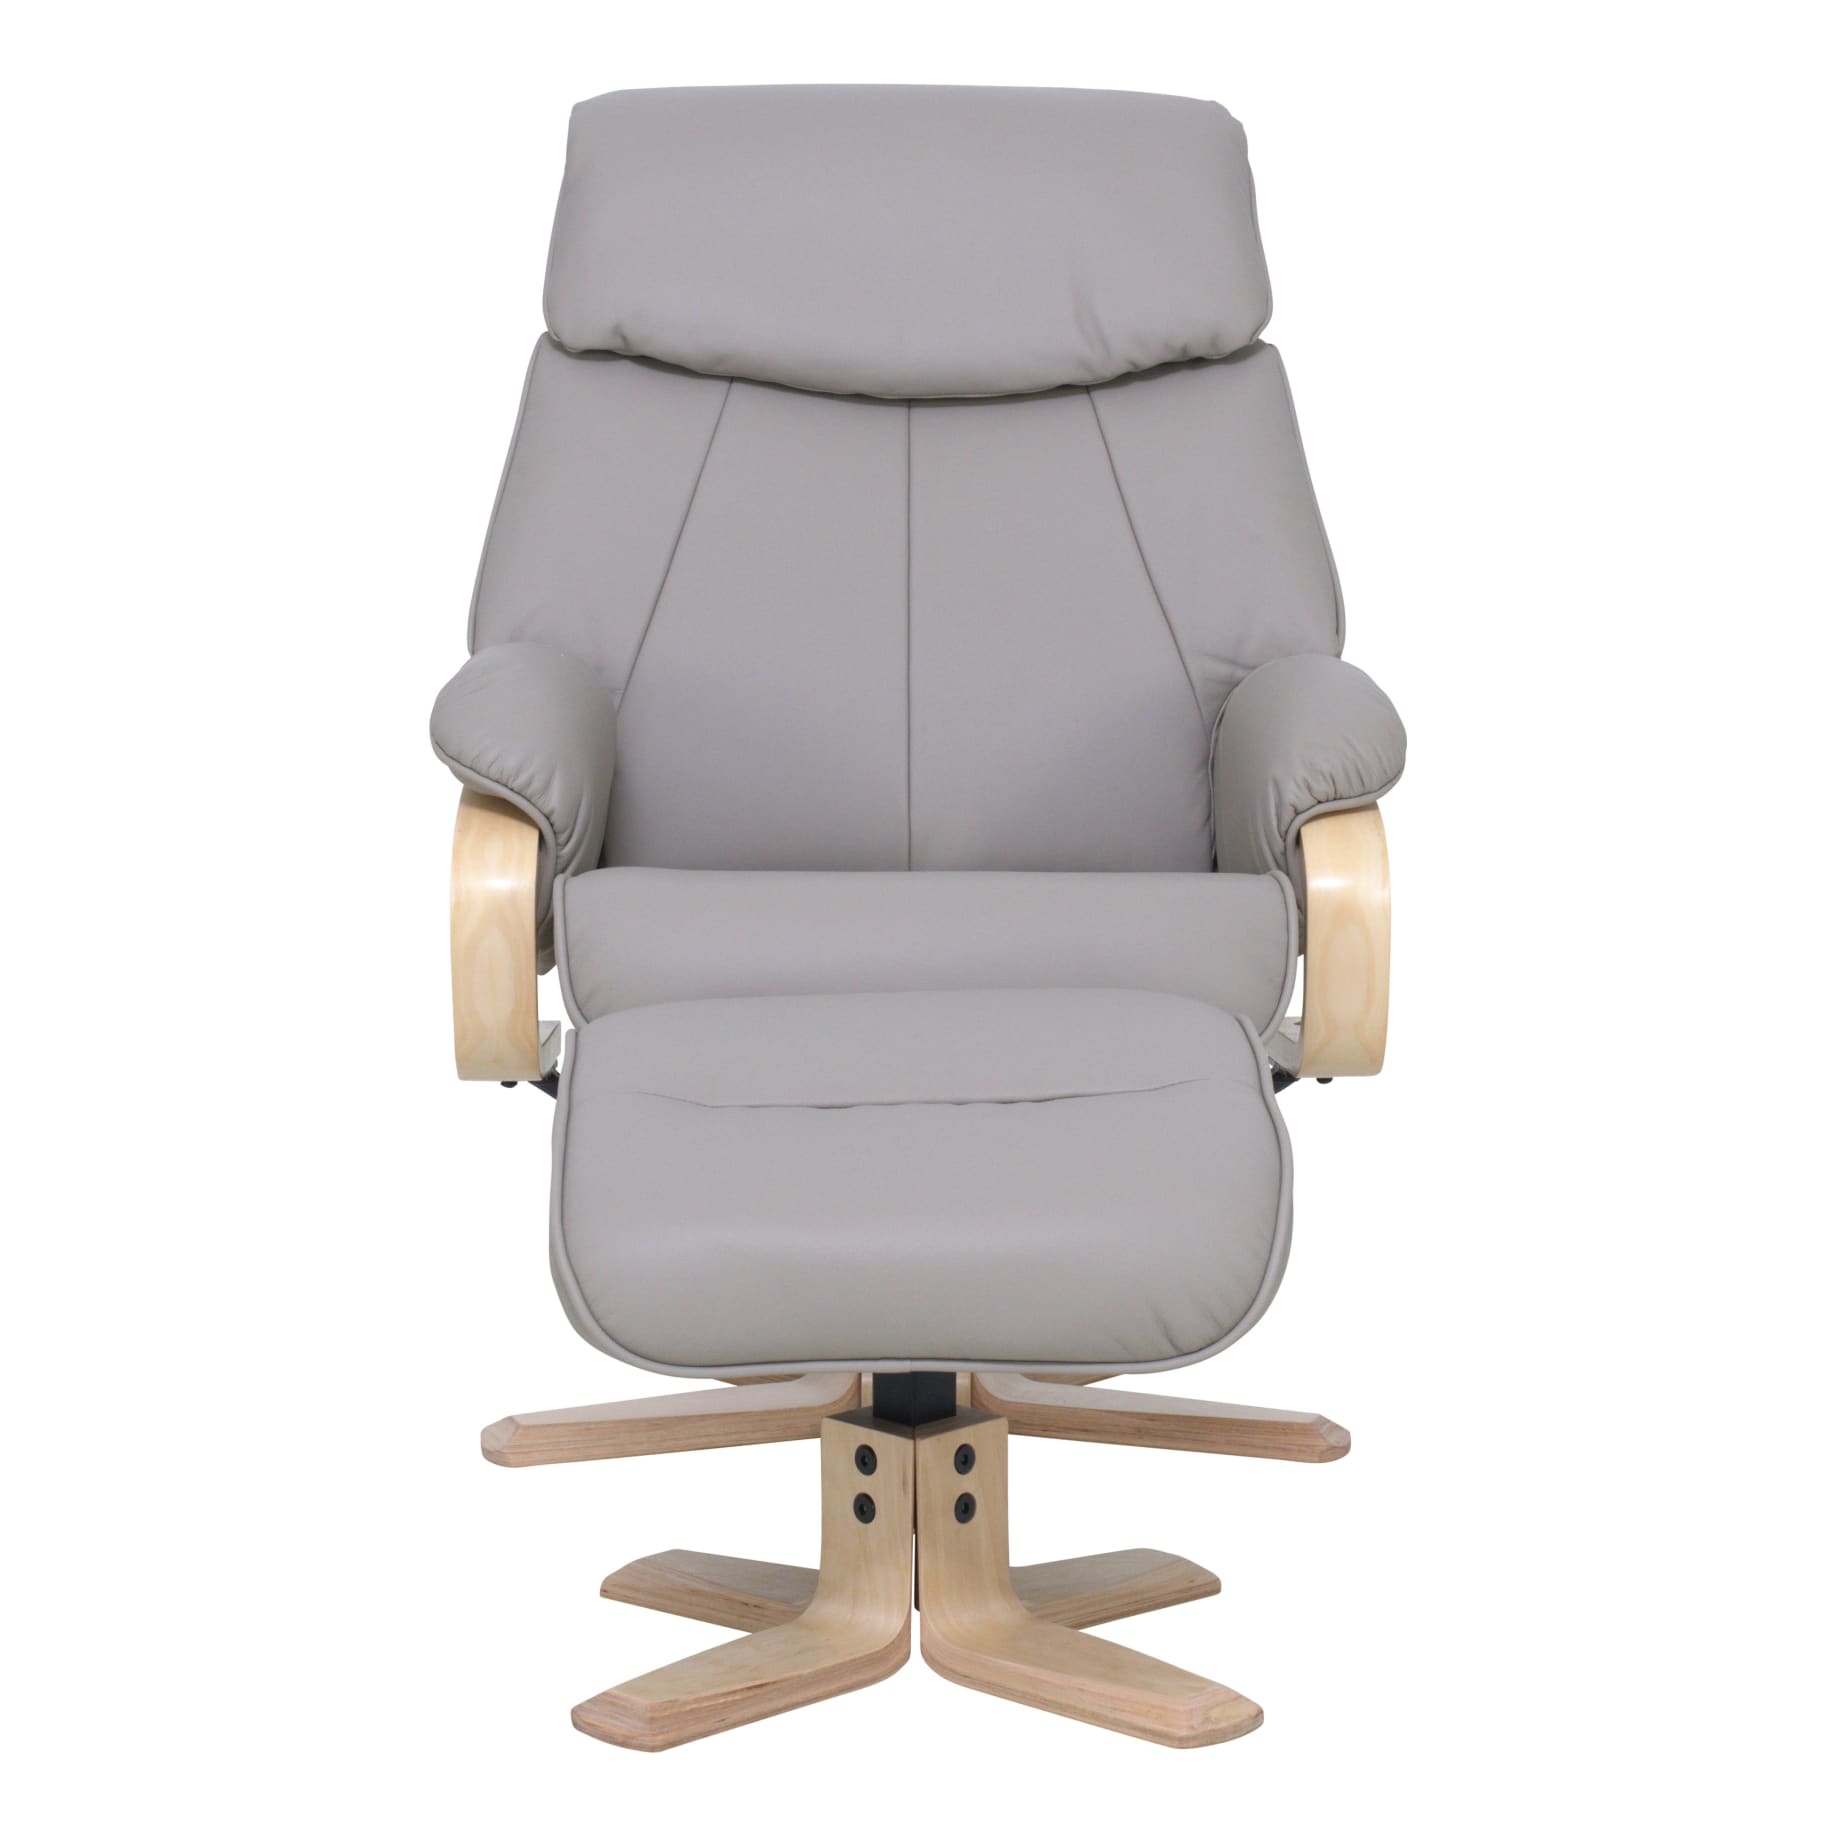 Turner Recliner Chair + Ottoman in Grey / Natural Leg